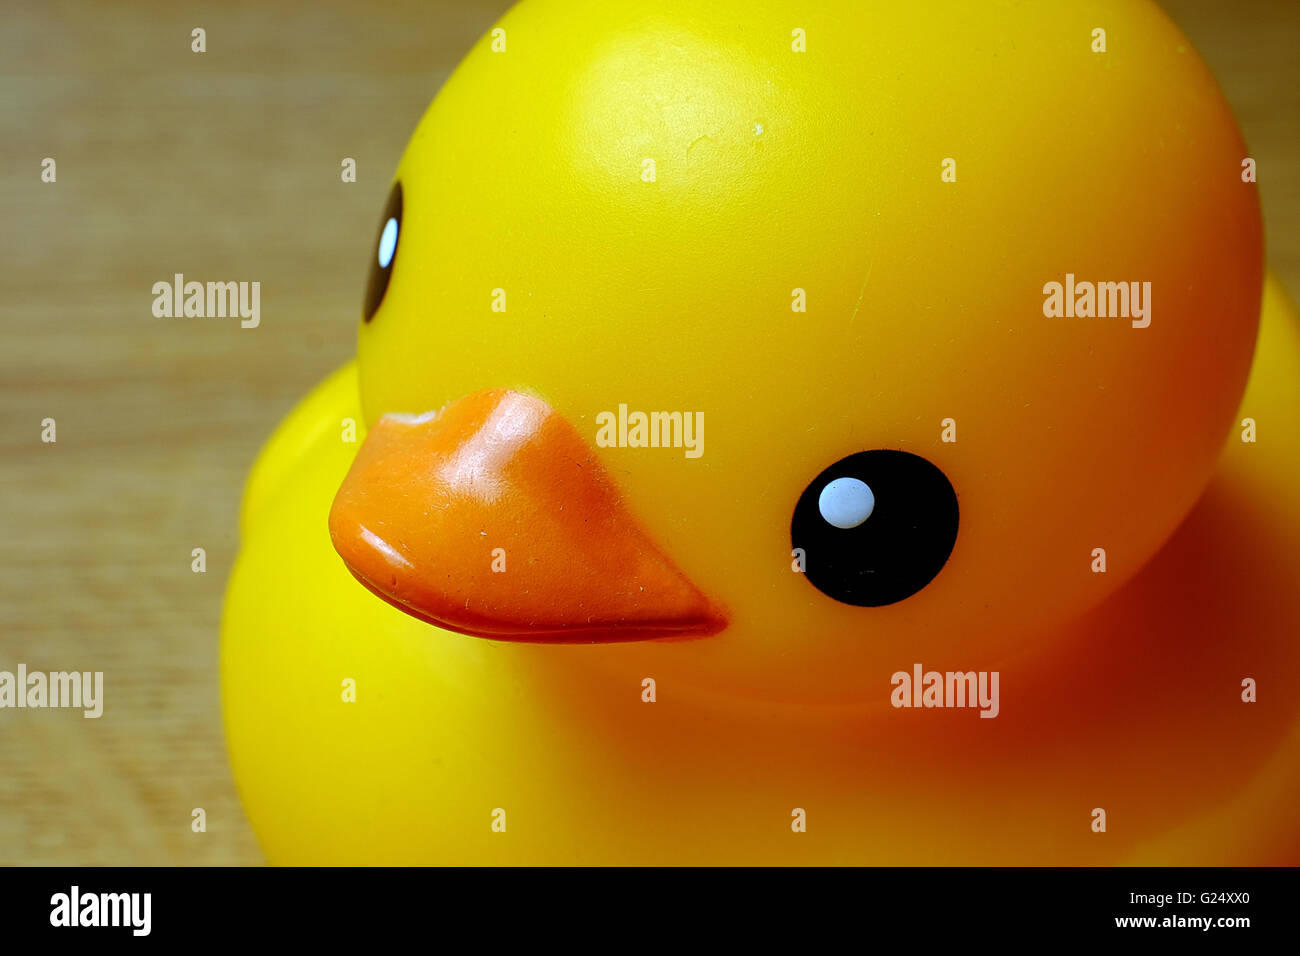 A yellow rubber duck Stock Photo